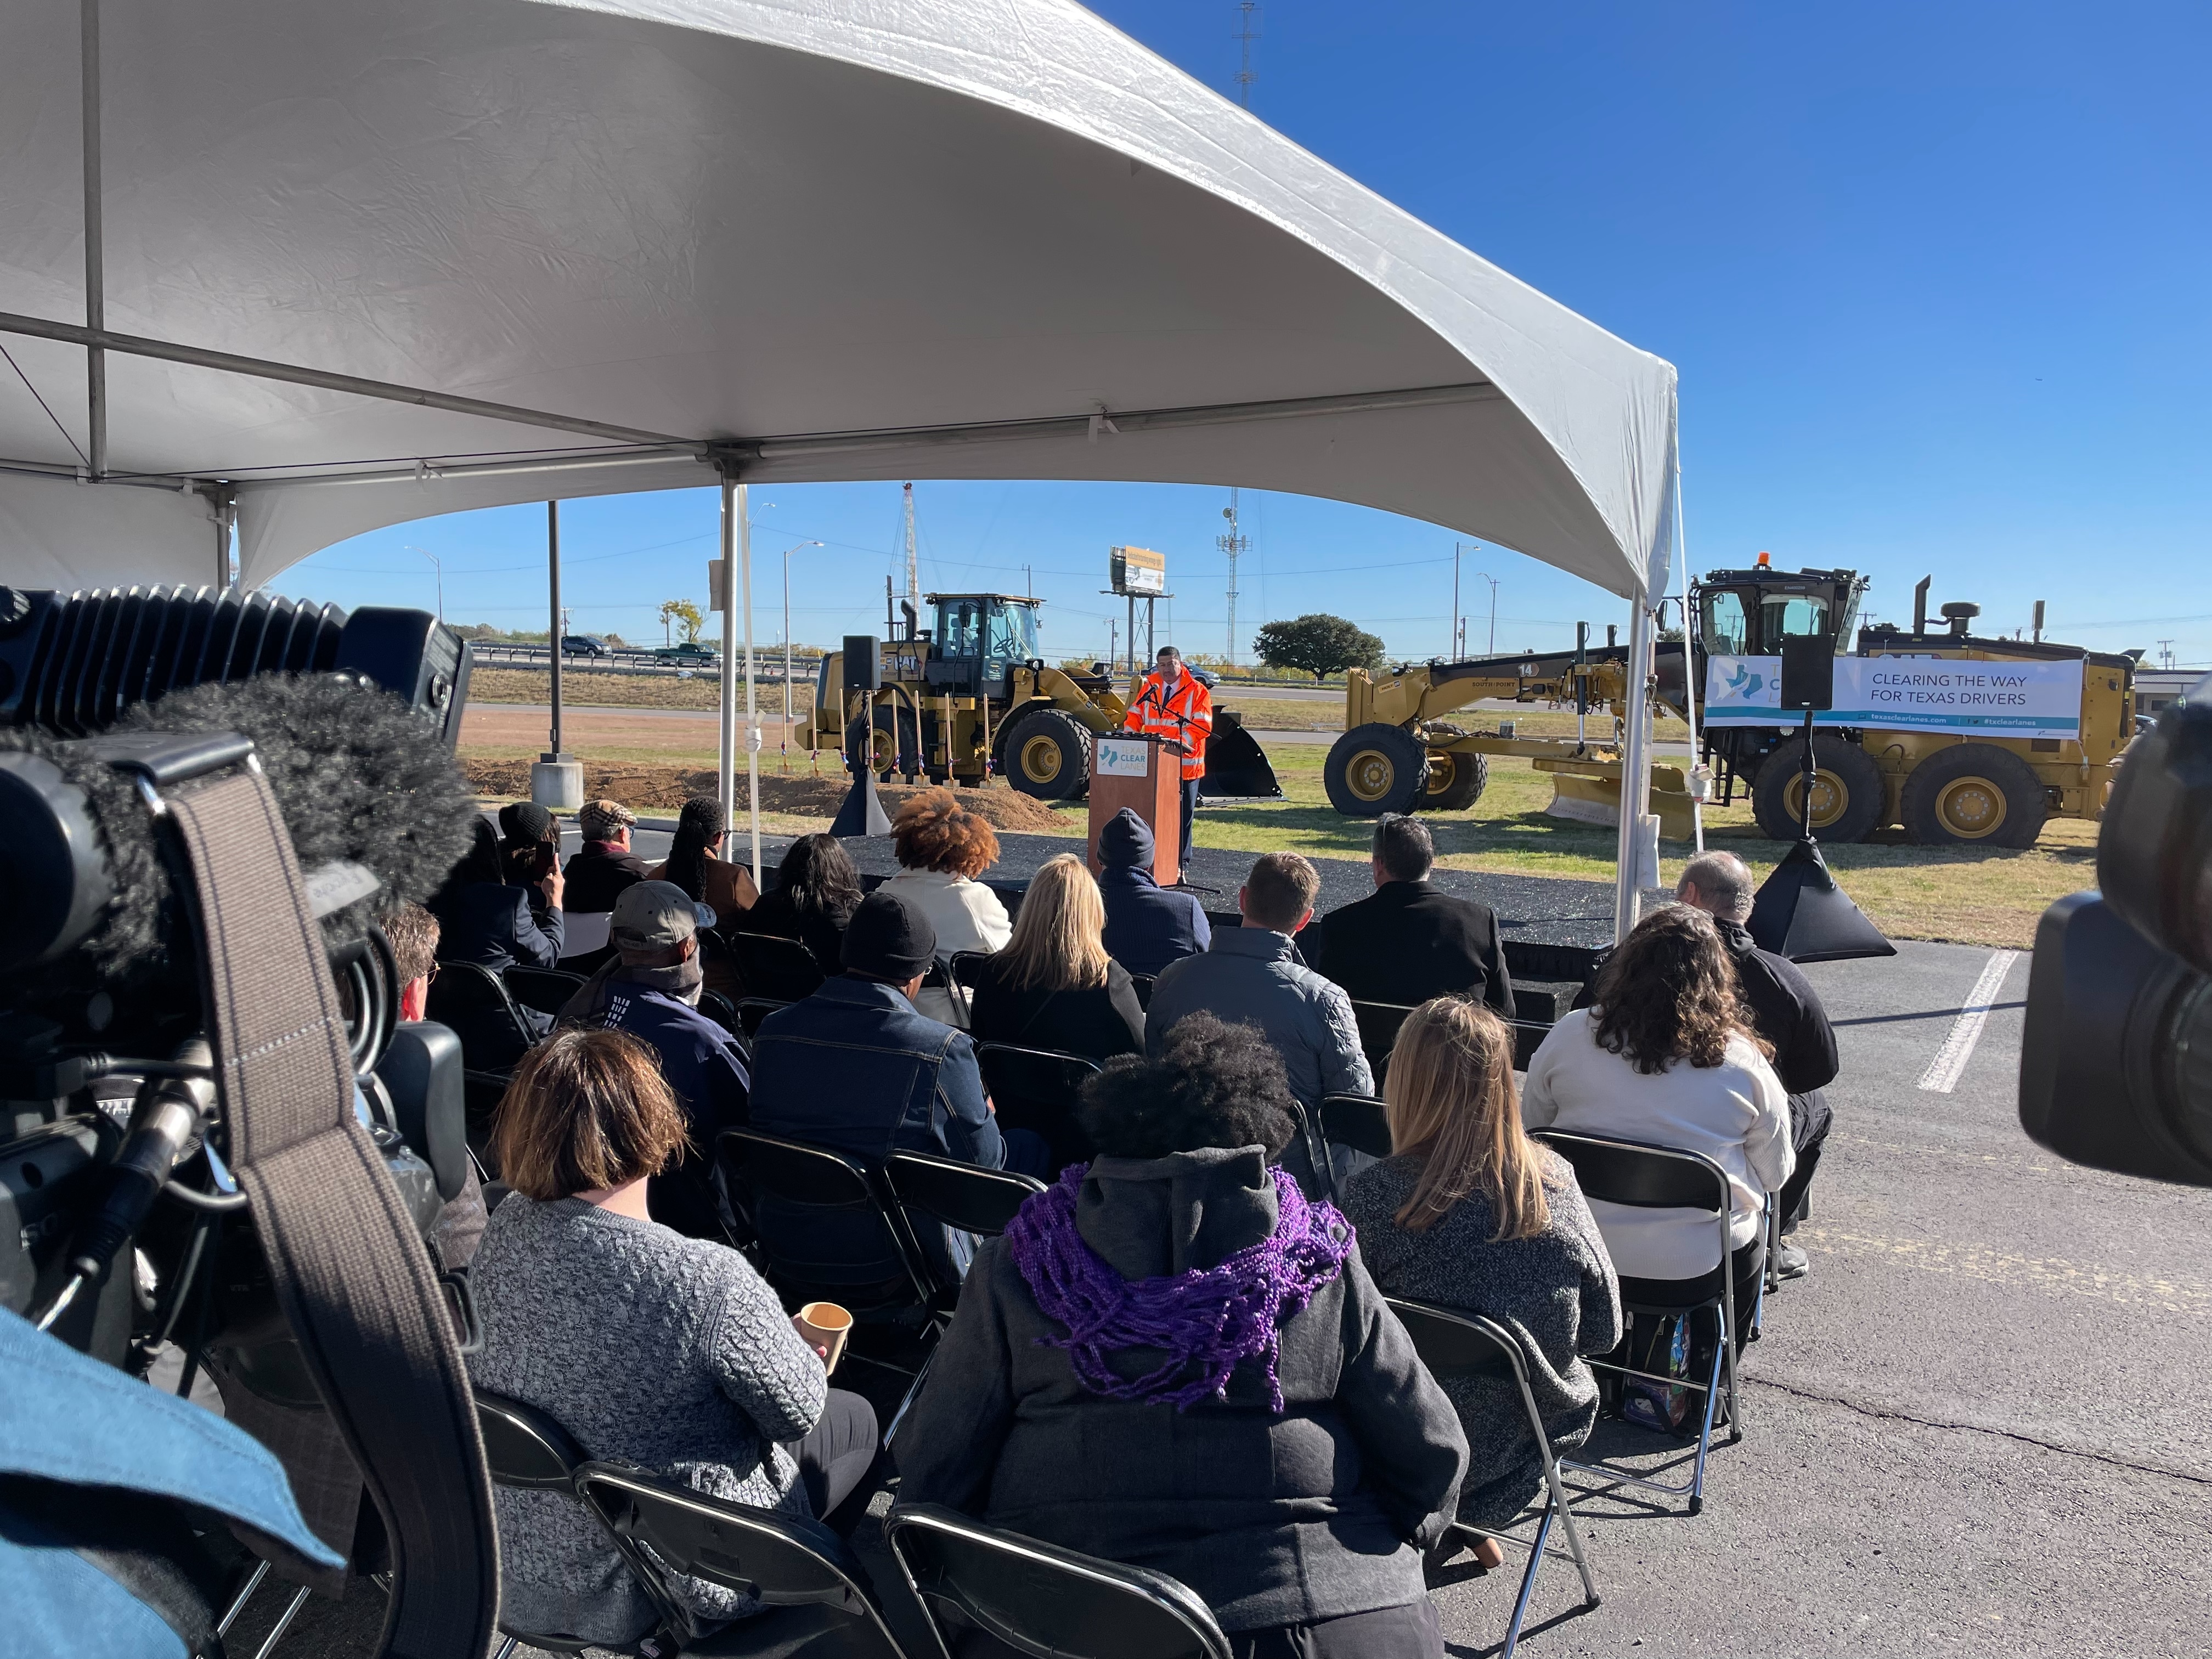 TxDOT Breaks Ground on Major Project That Will Affect Drivers for
Years To Come